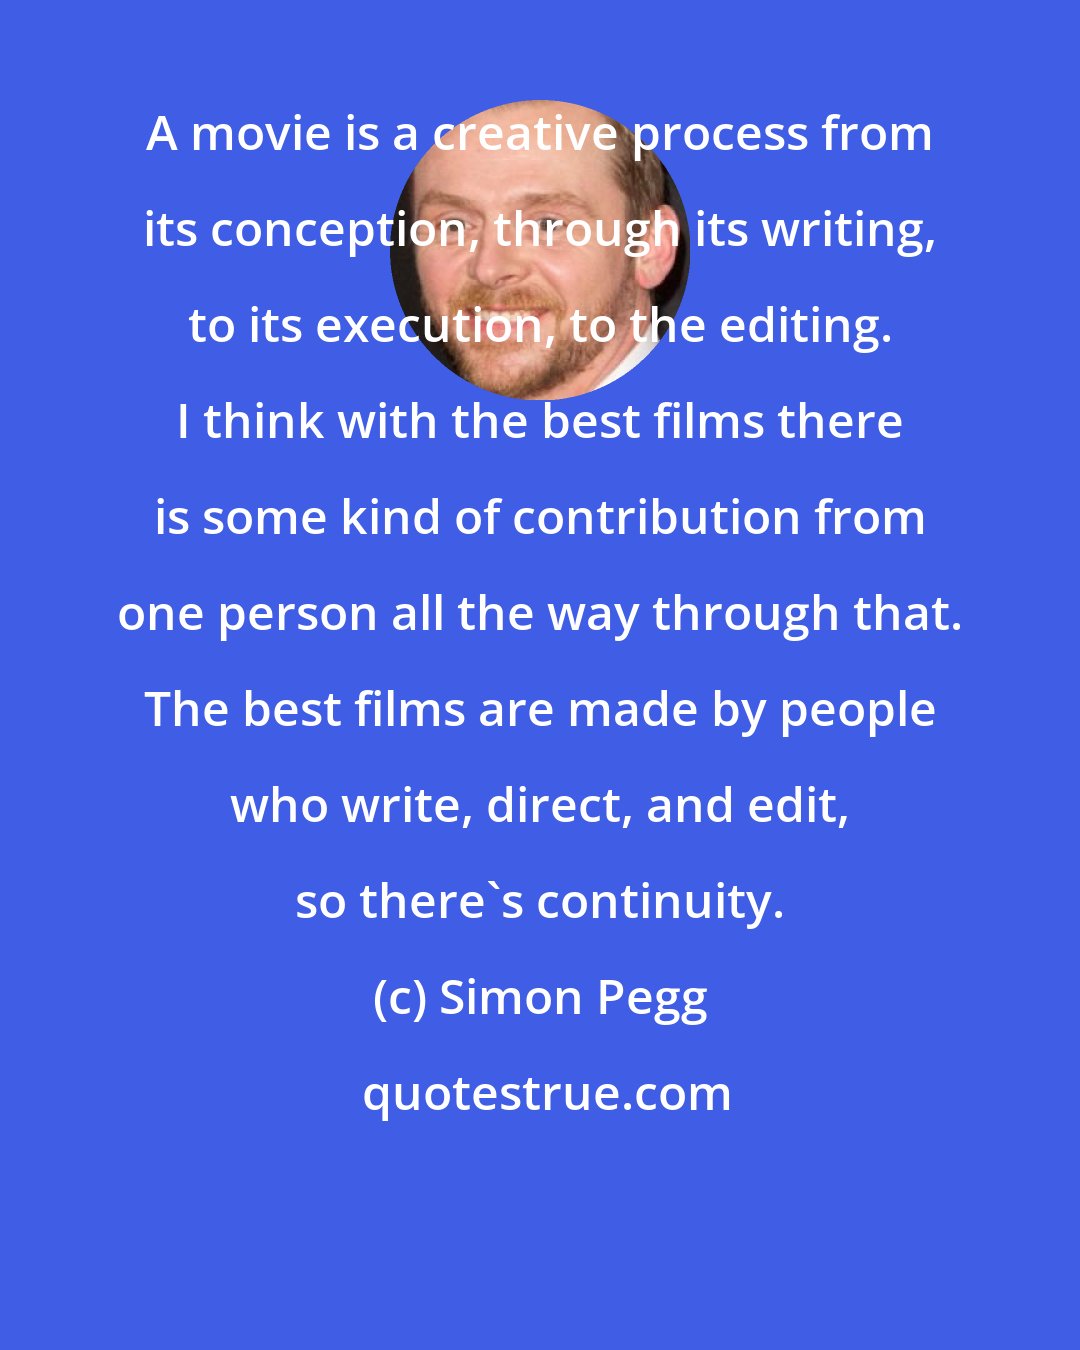 Simon Pegg: A movie is a creative process from its conception, through its writing, to its execution, to the editing. I think with the best films there is some kind of contribution from one person all the way through that. The best films are made by people who write, direct, and edit, so there's continuity.